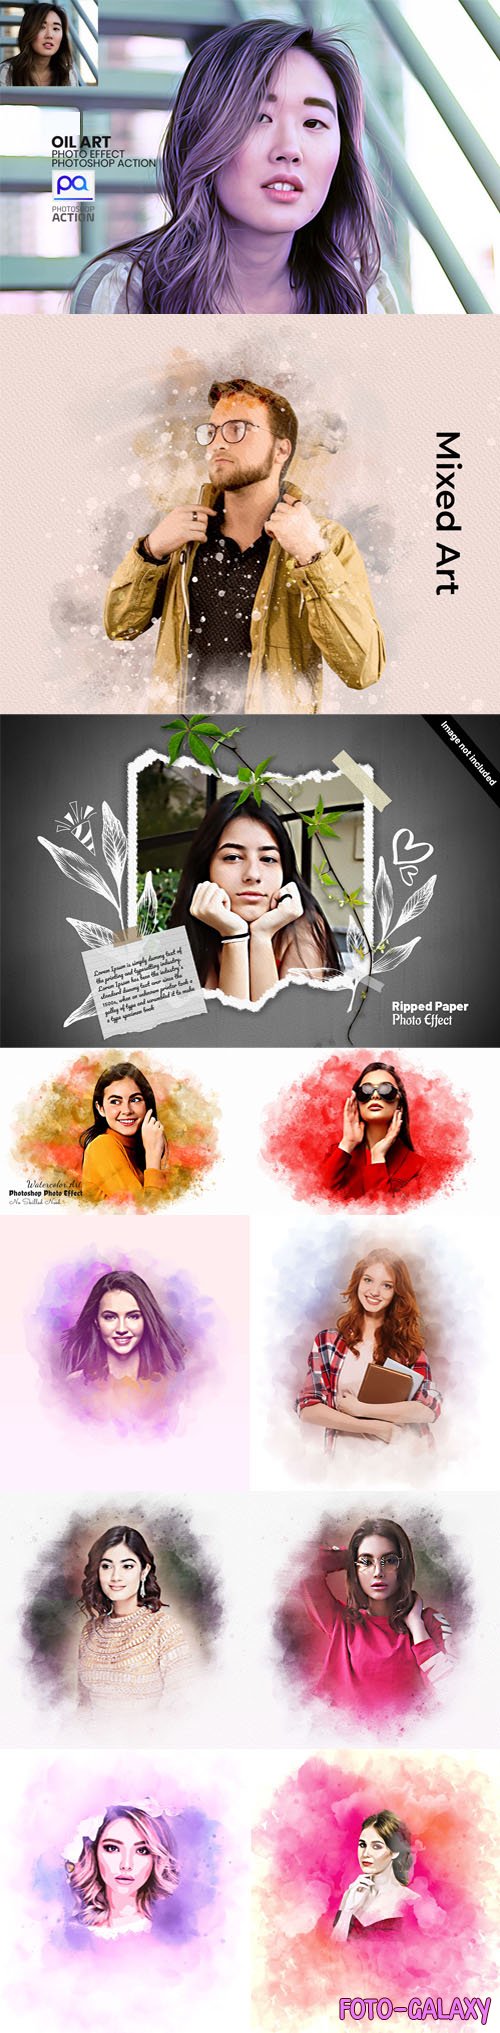 10+ Best Photo Effects & Actions for Photoshop [Vol.6]